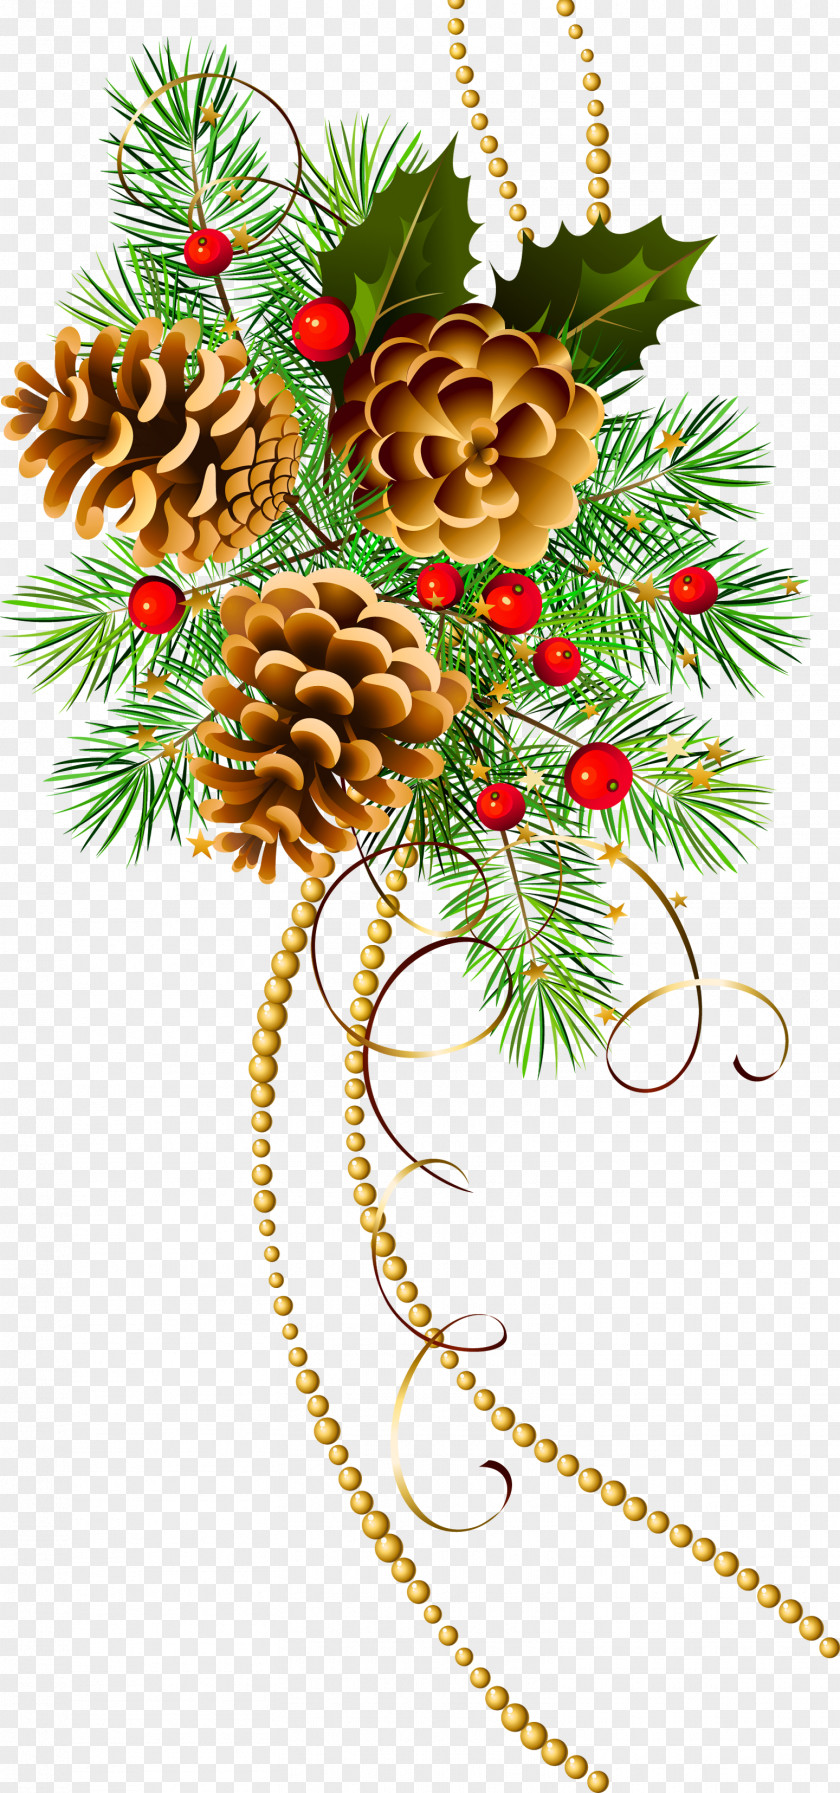 Three Christmas Cones With Pine Branch Clipart Decoration Ornament Tree Clip Art PNG